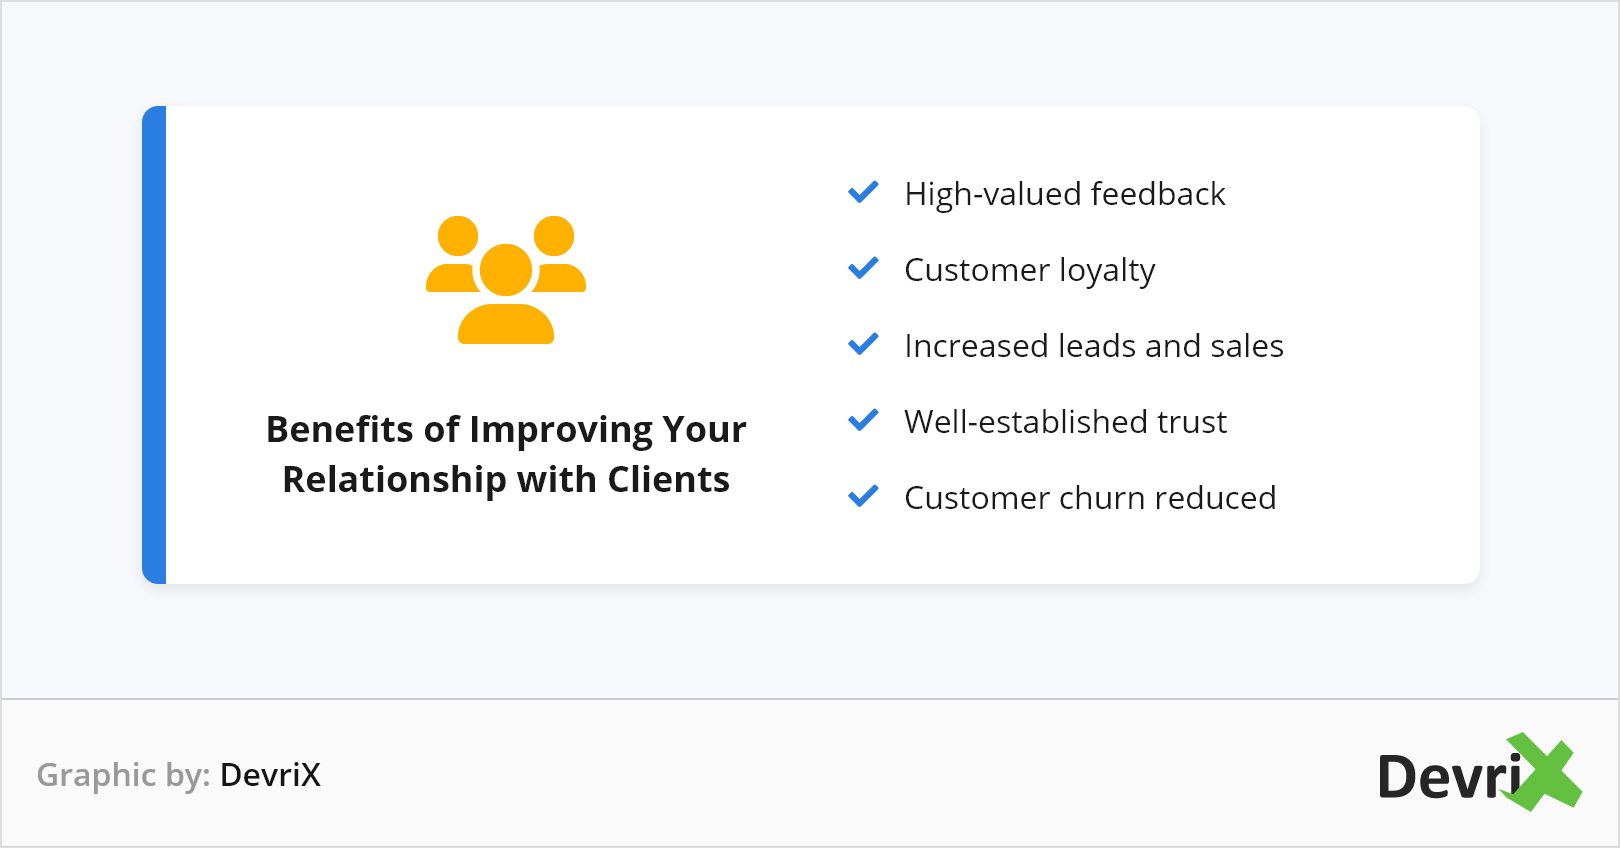 Benefits of Improving YourRelationship with Clients